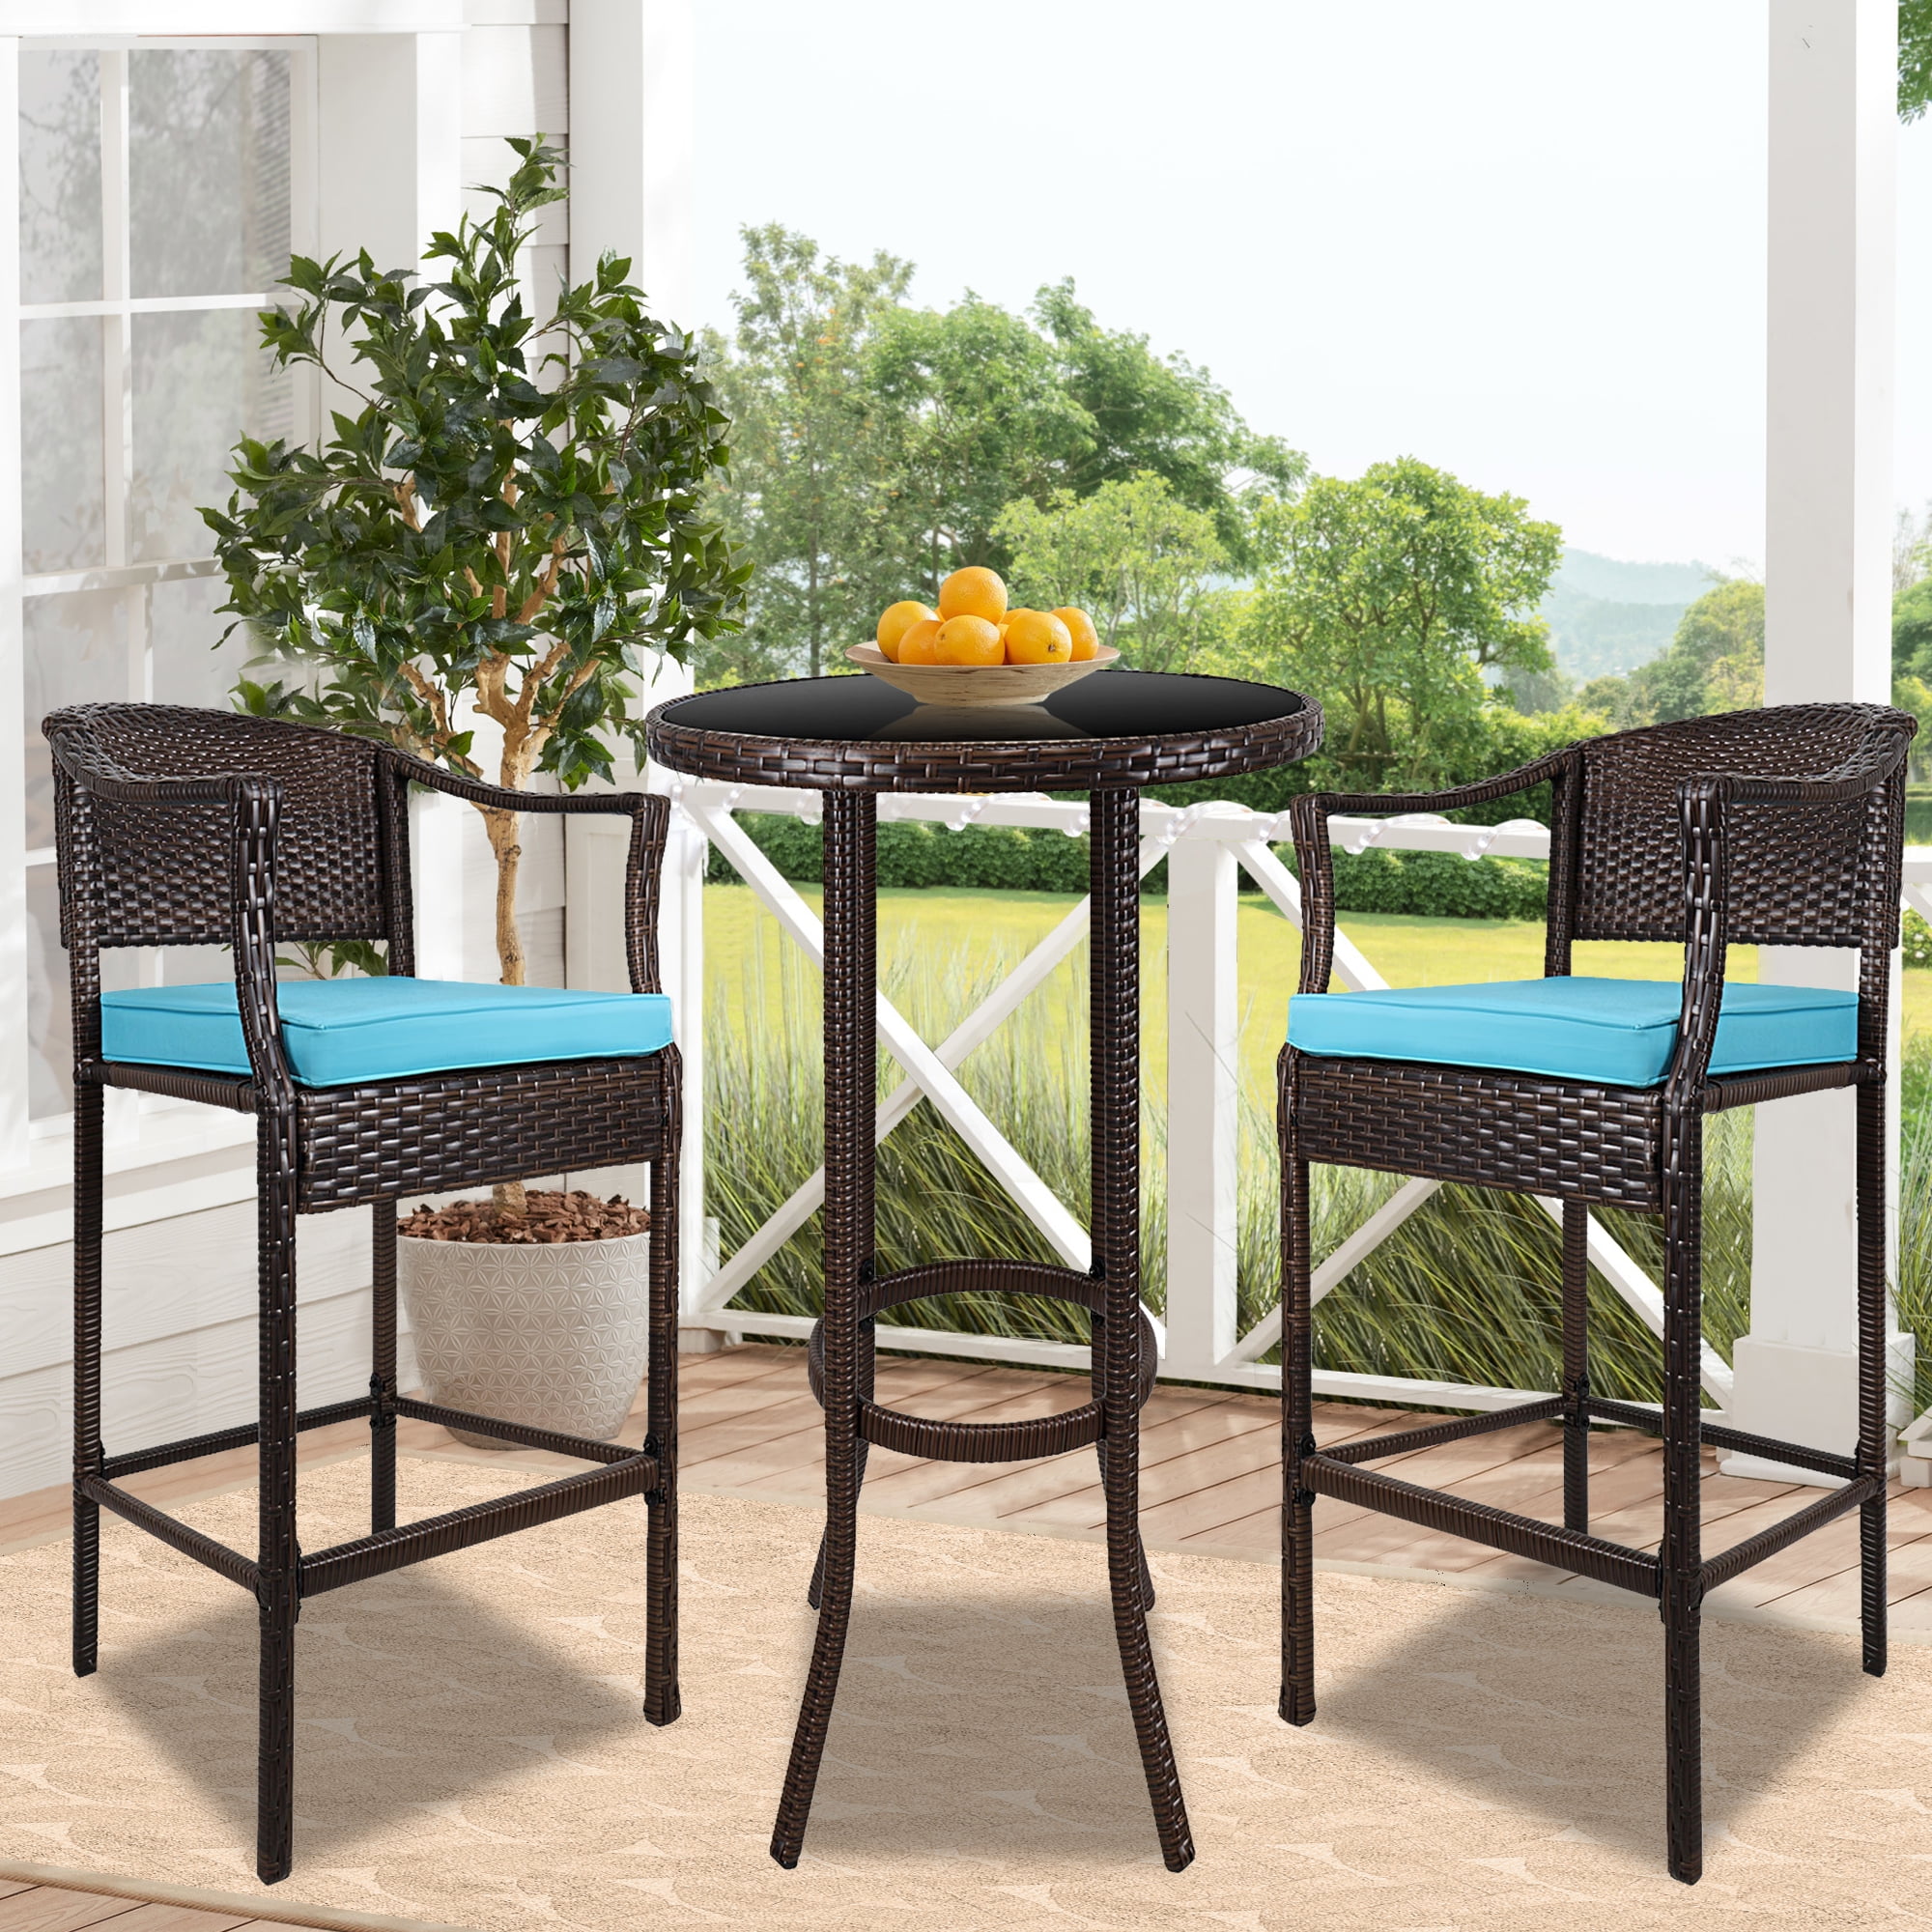 Patio Bar Height Bistro Sets 3 Piece Furniture With High Glass Top Table And Cushioned Chairs Outdoor Wicker Pe Rattan Conversation Set 2 Stools For Garden Balcony - Bistro Bar Patio Furniture Sets